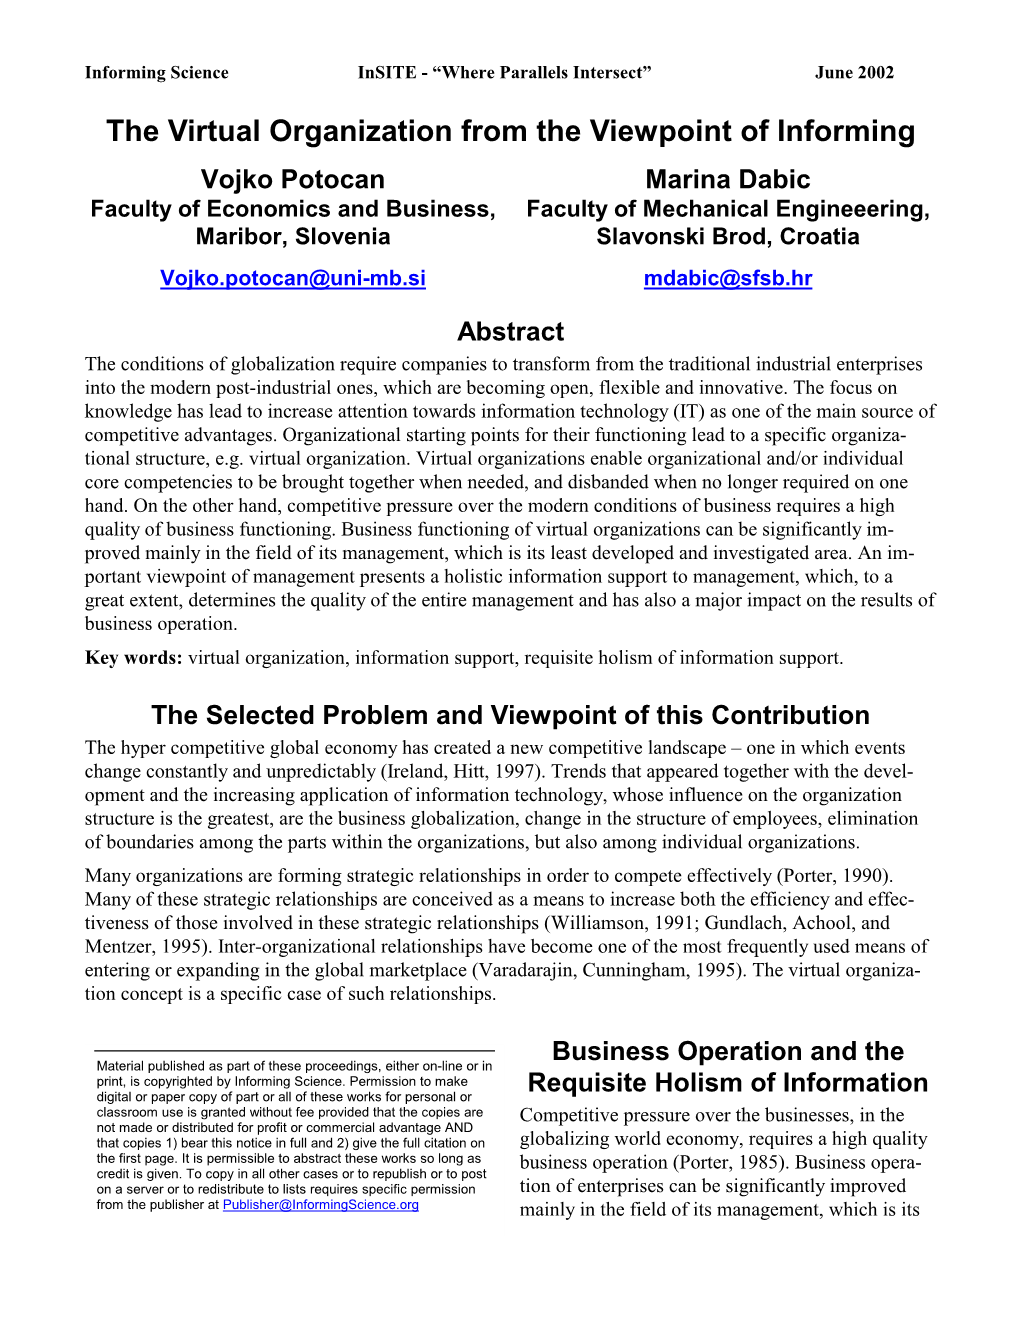 The Virtual Organization from the Viewpoint of Informing